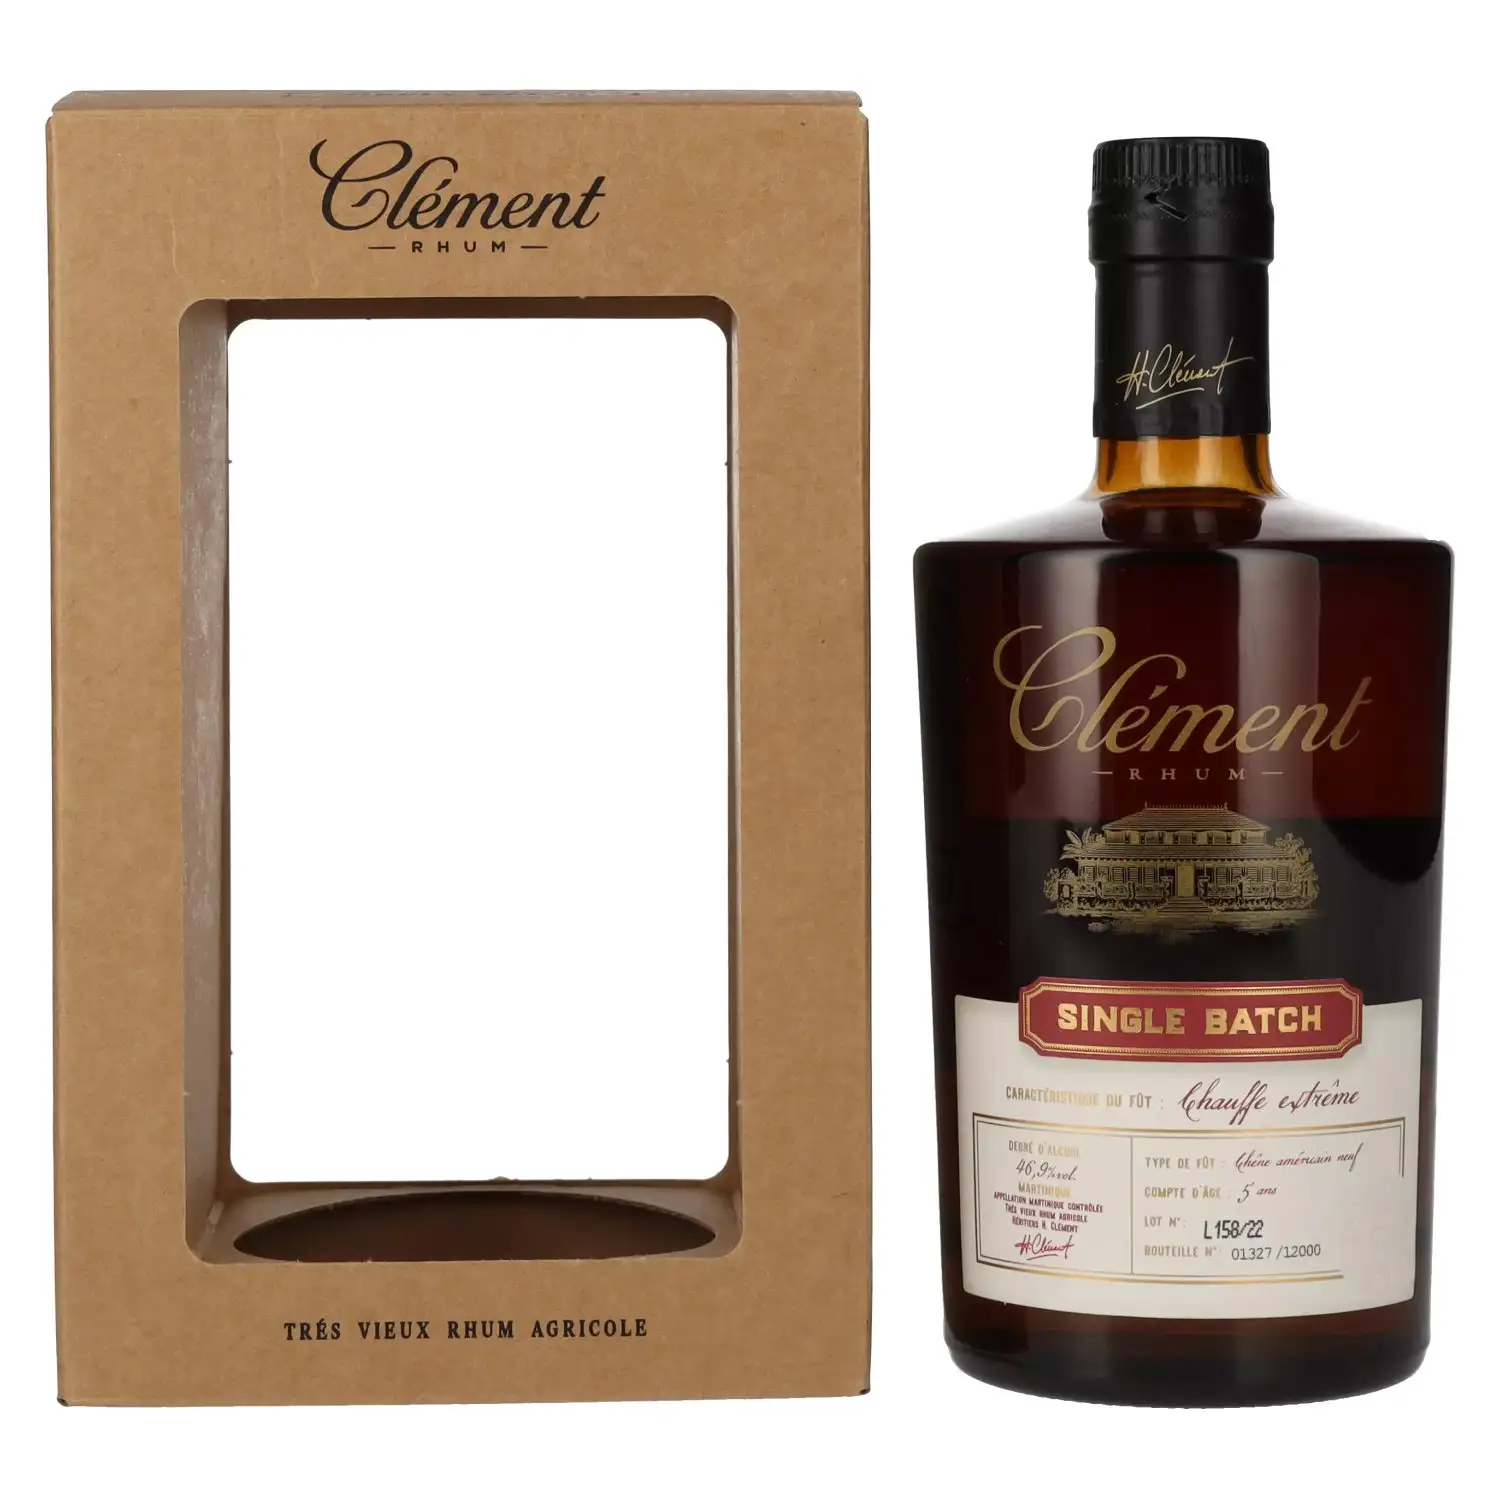 Image of the front of the bottle of the rum Clément Single batch (Chauffe extrême)